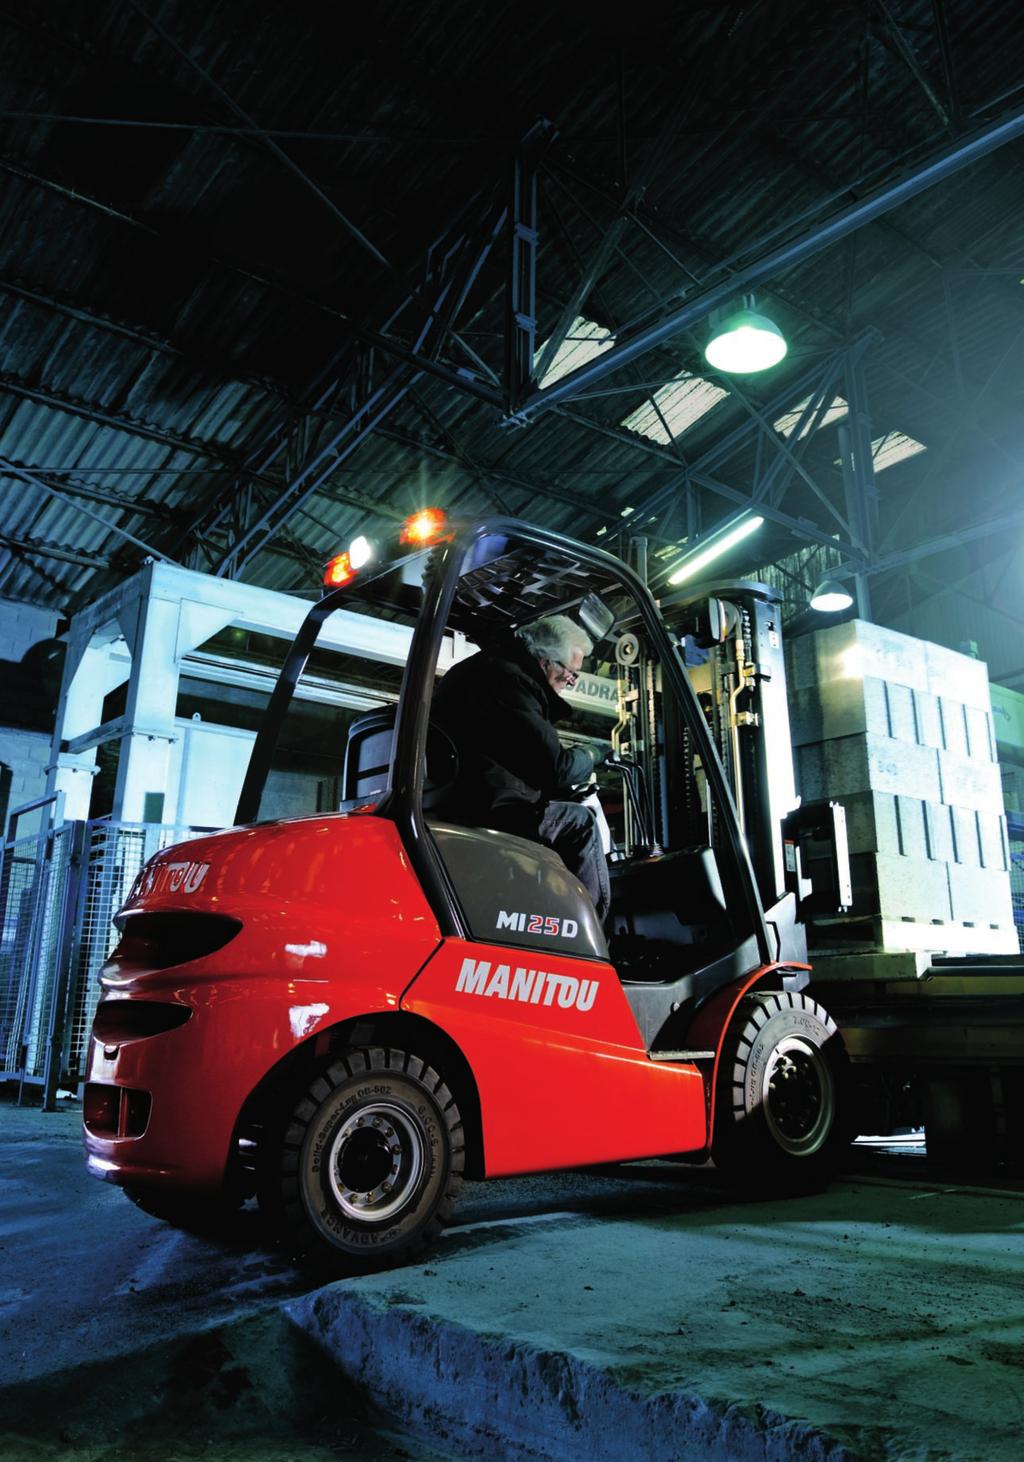 DEsiGN 100% EffiCiENCY With the new line of MANITOU MI industrial forklifts, we put design to work for efficiency!